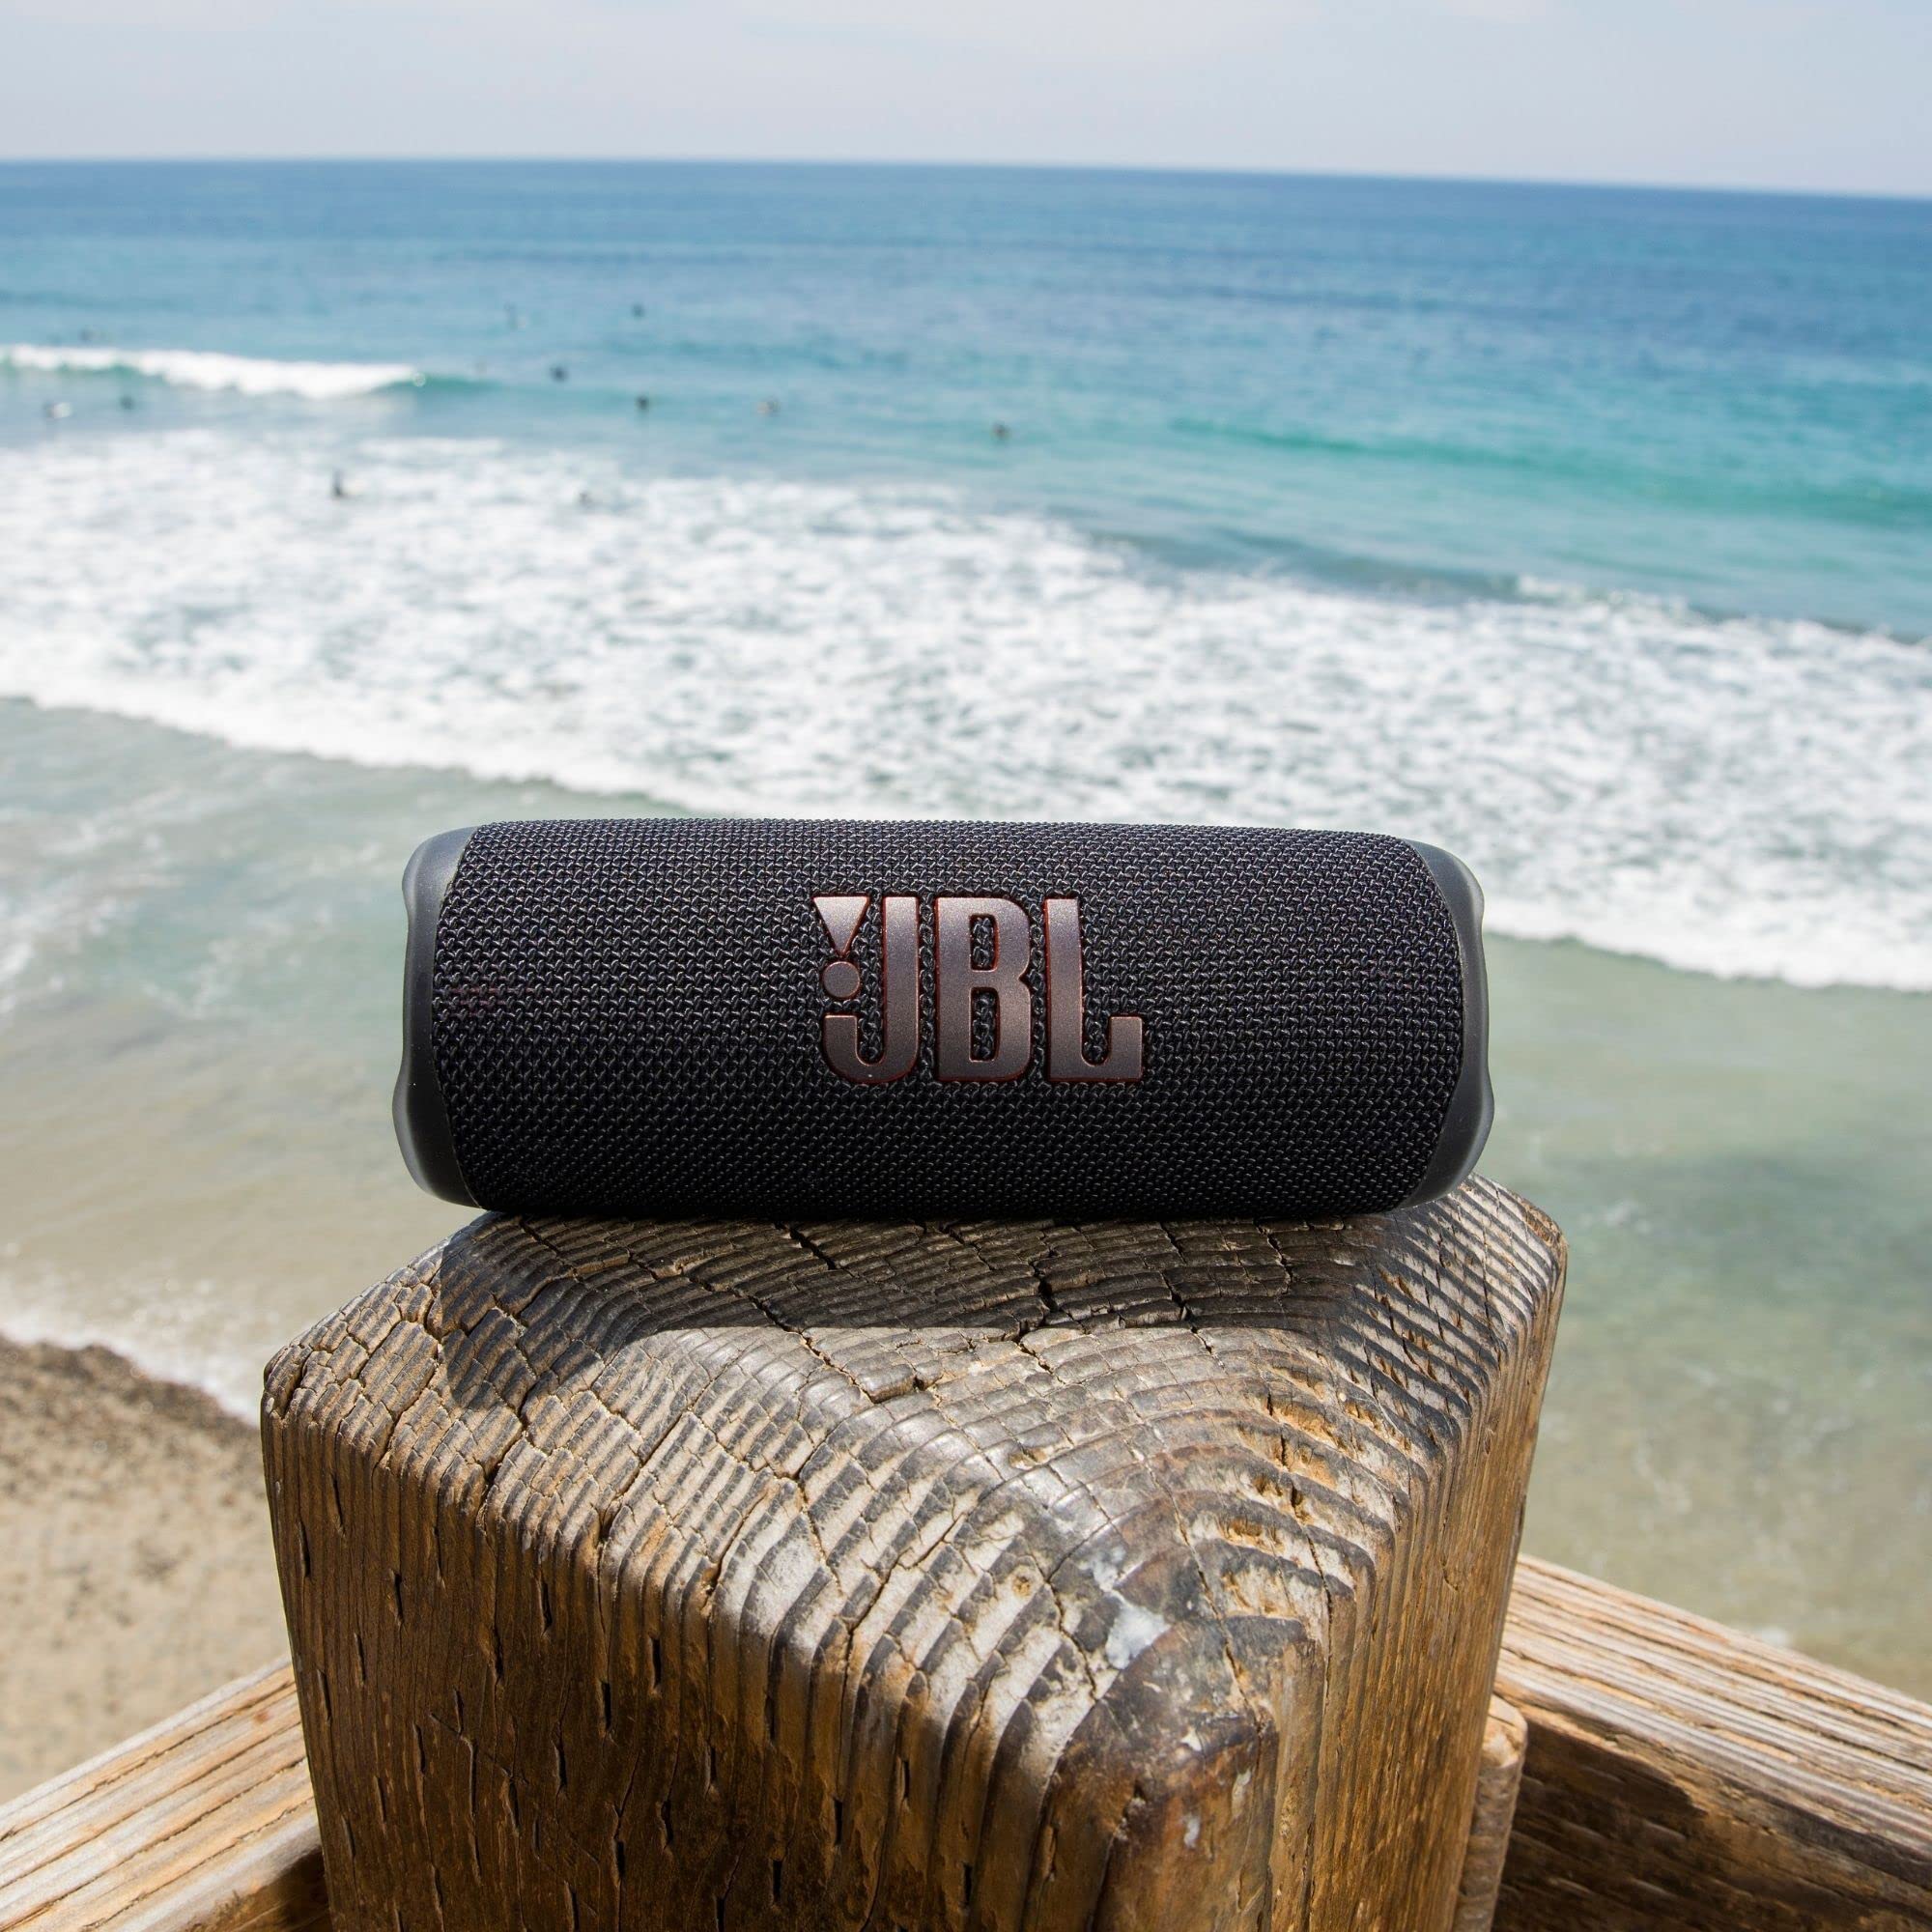 JBL Flip 6 - Portable Bluetooth Speaker, powerful sound and deep bass, IPX7 waterproof, 12 hours of playtime, JBL PartyBoost for multiple speaker pairing for home, outdoor and travel (Black)